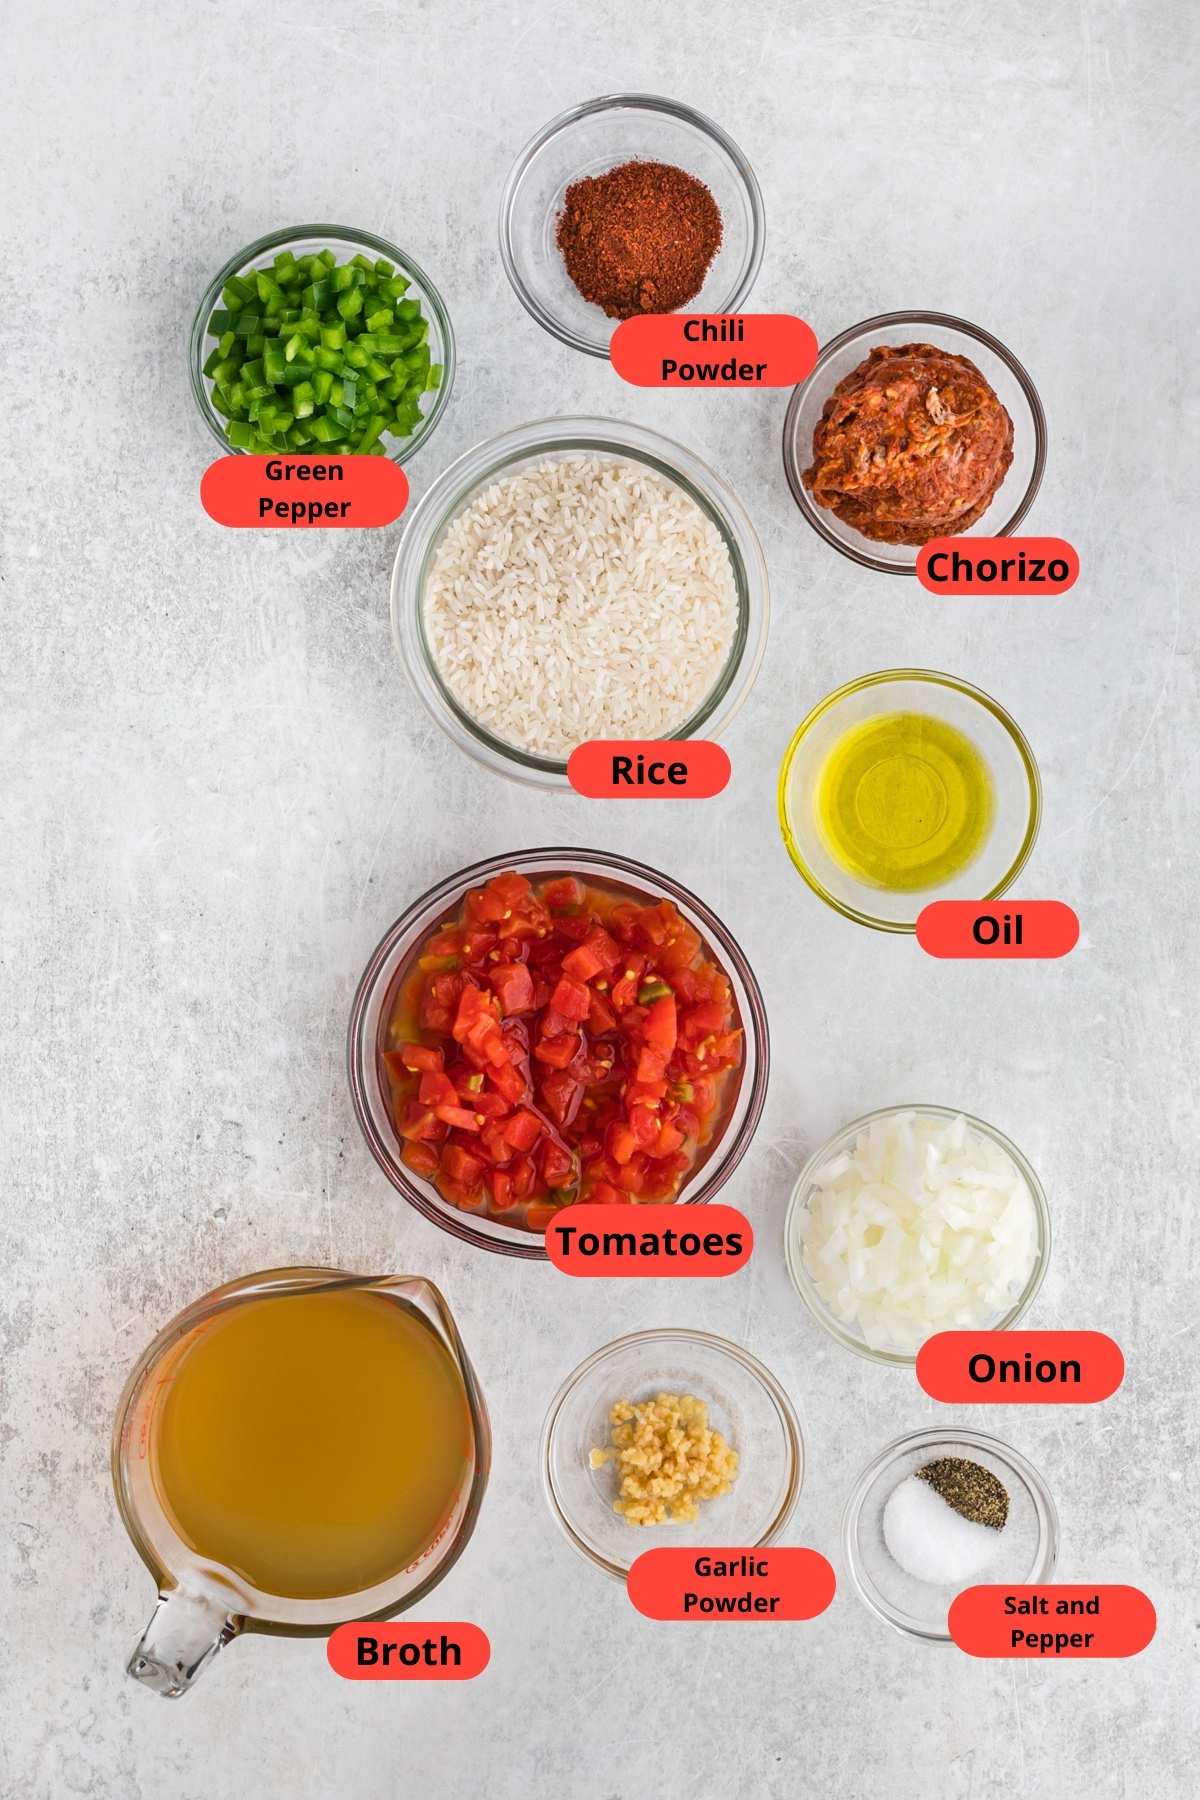 Ingredients to make a rice recipe including tomatoes, rice, broth, green pepper, onion